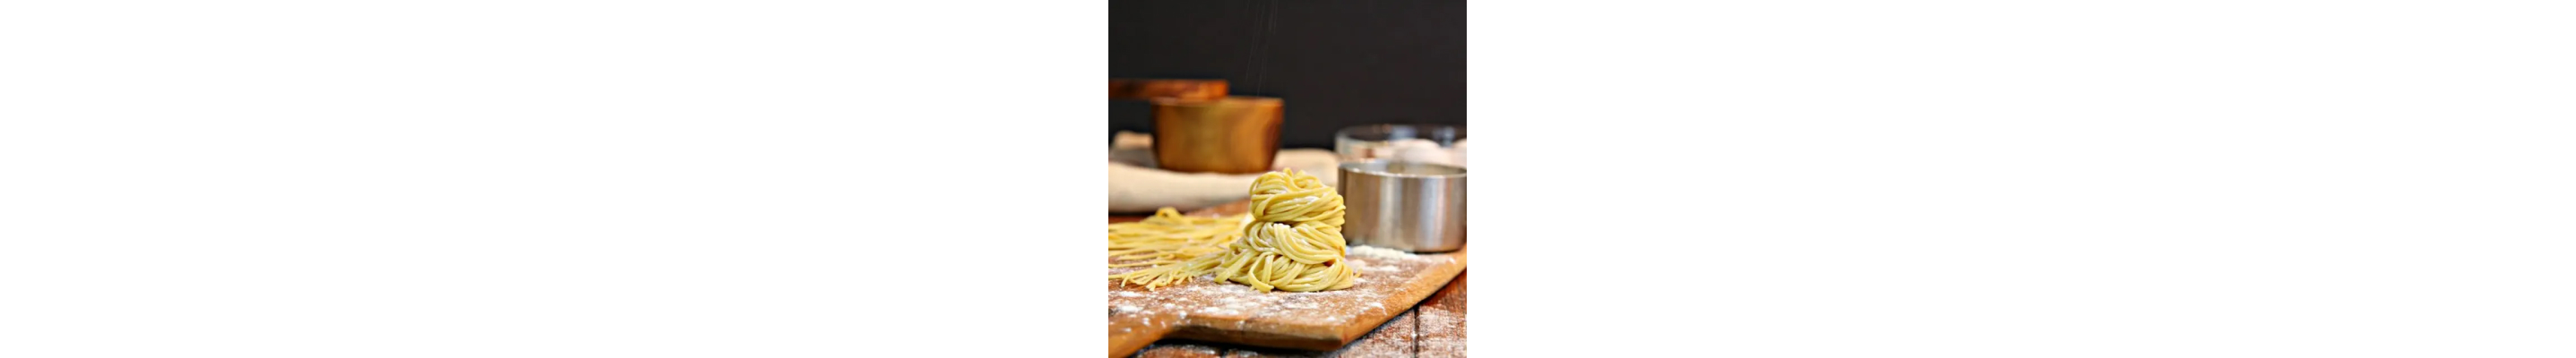 Pile of freshly-rolled pasta on a wood platter 